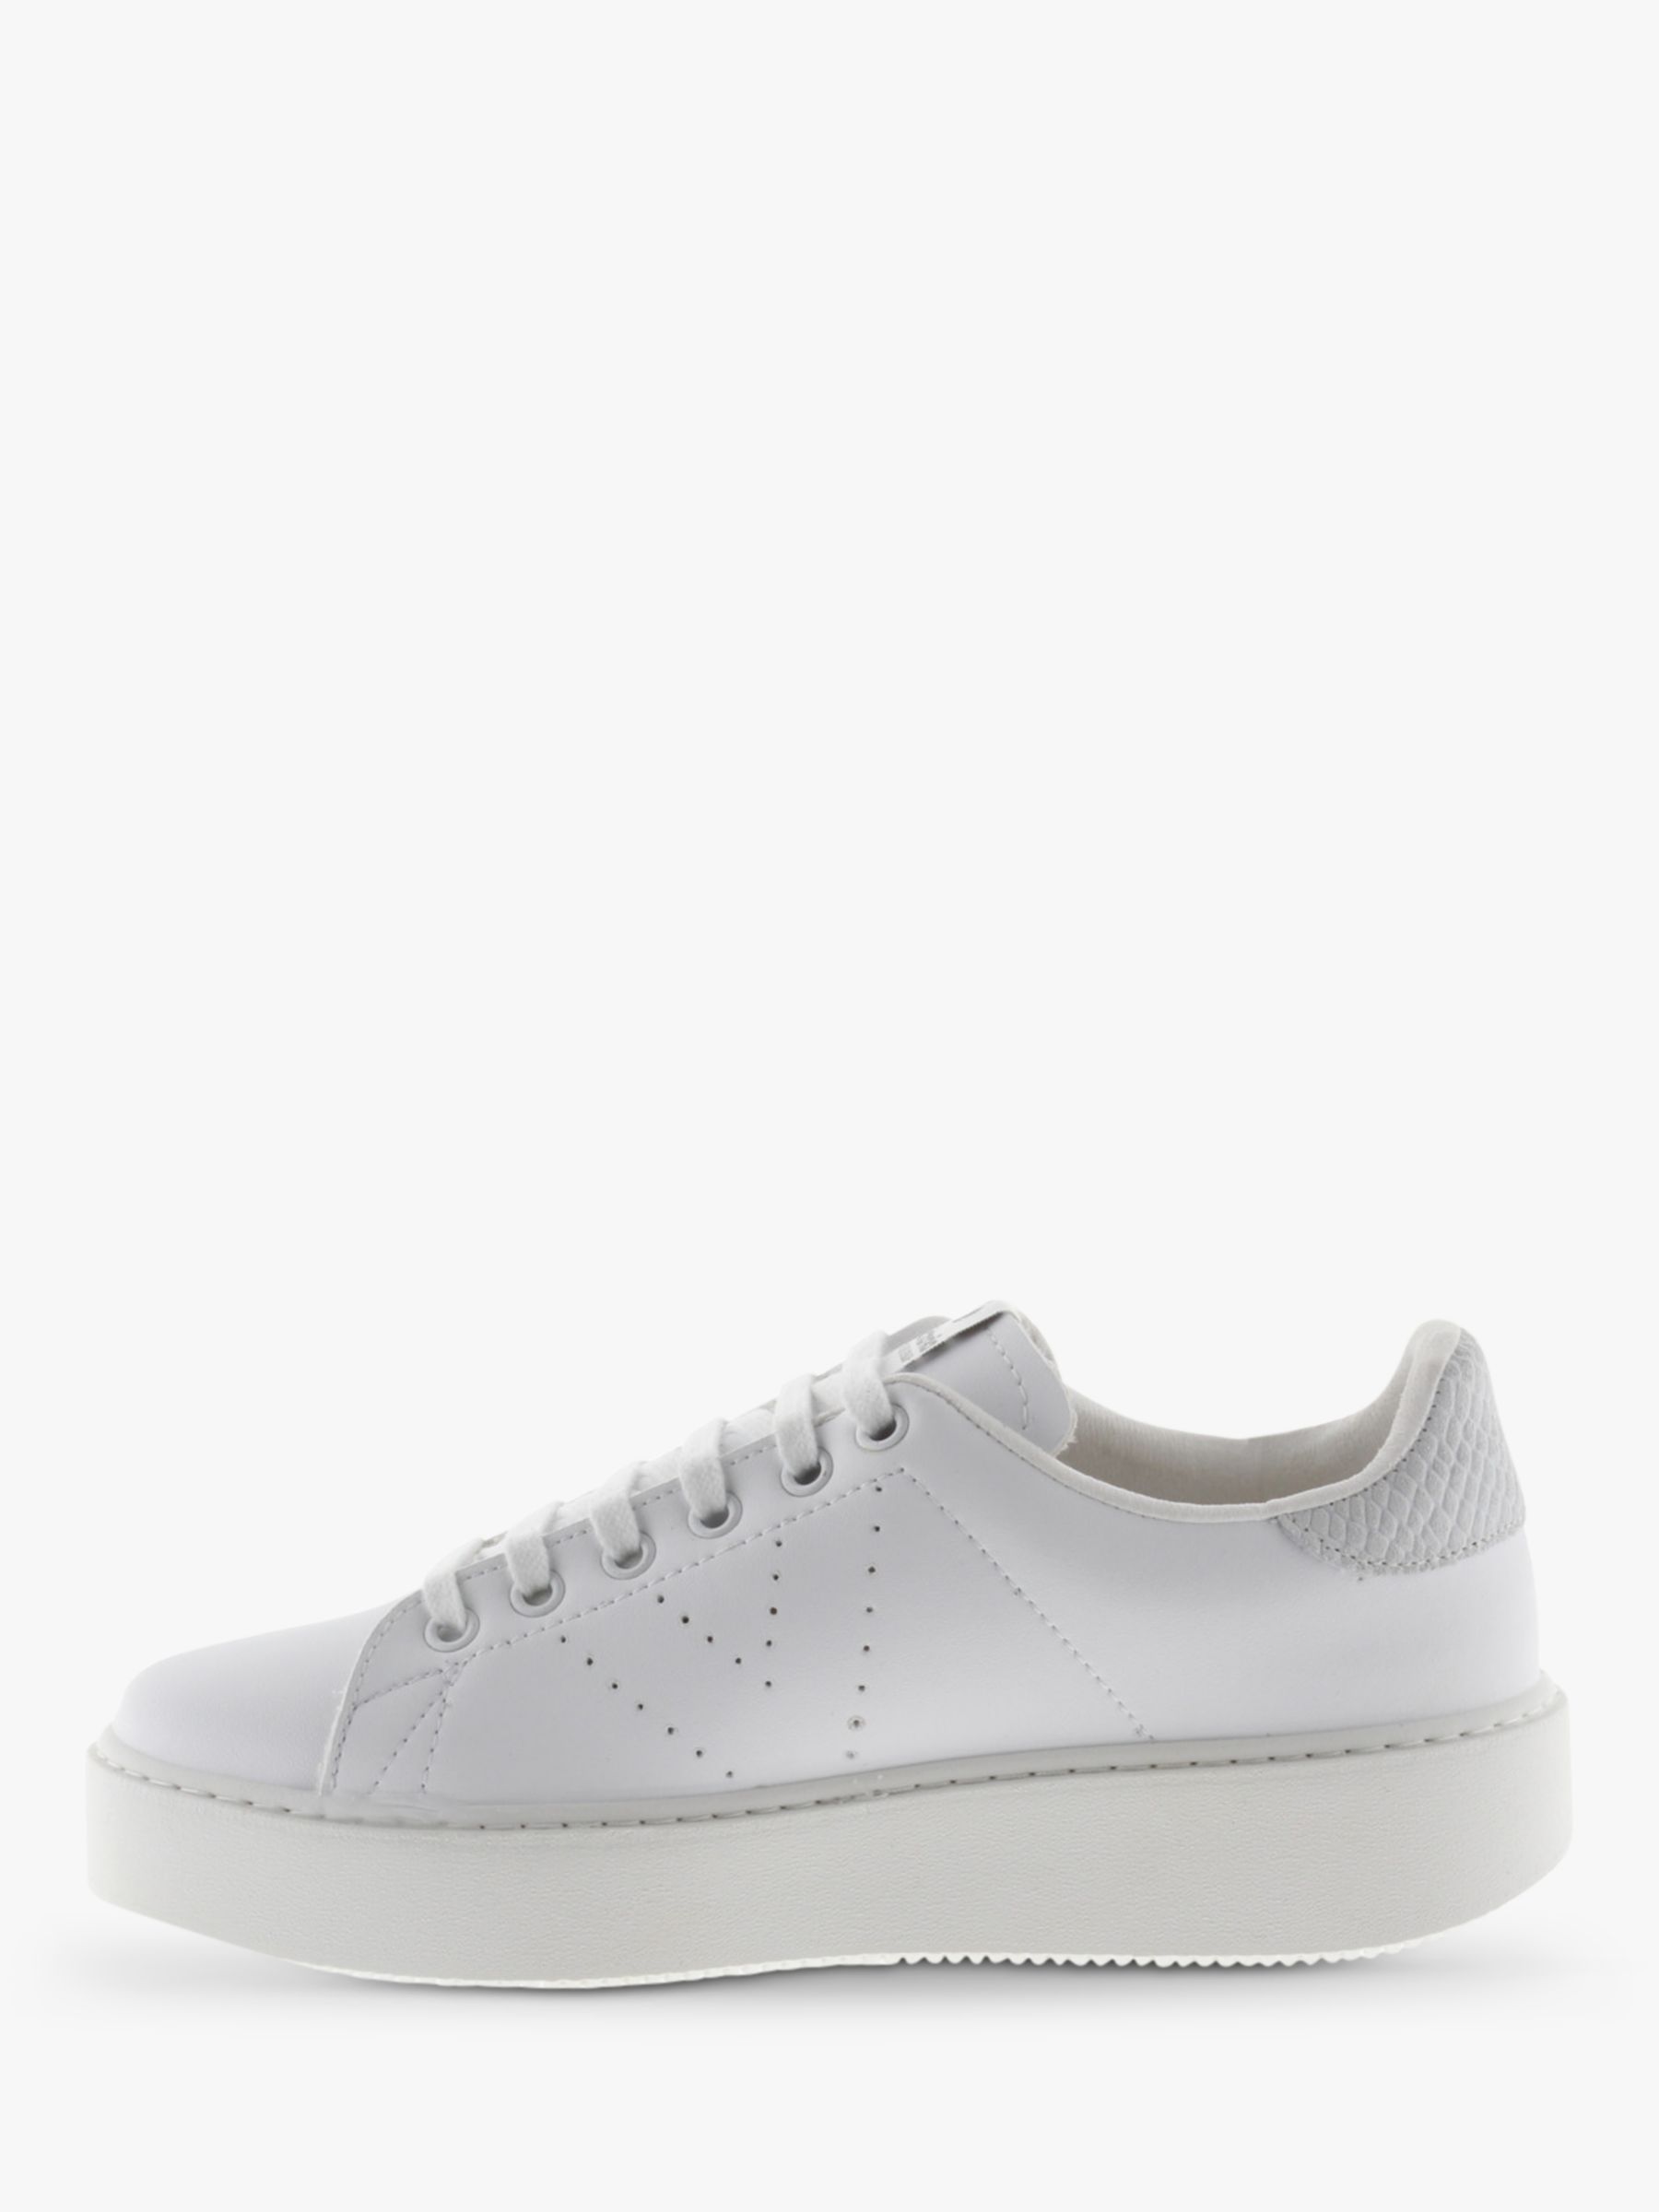 Victoria Shoes Utopia Flatform Lace Up Trainers, White